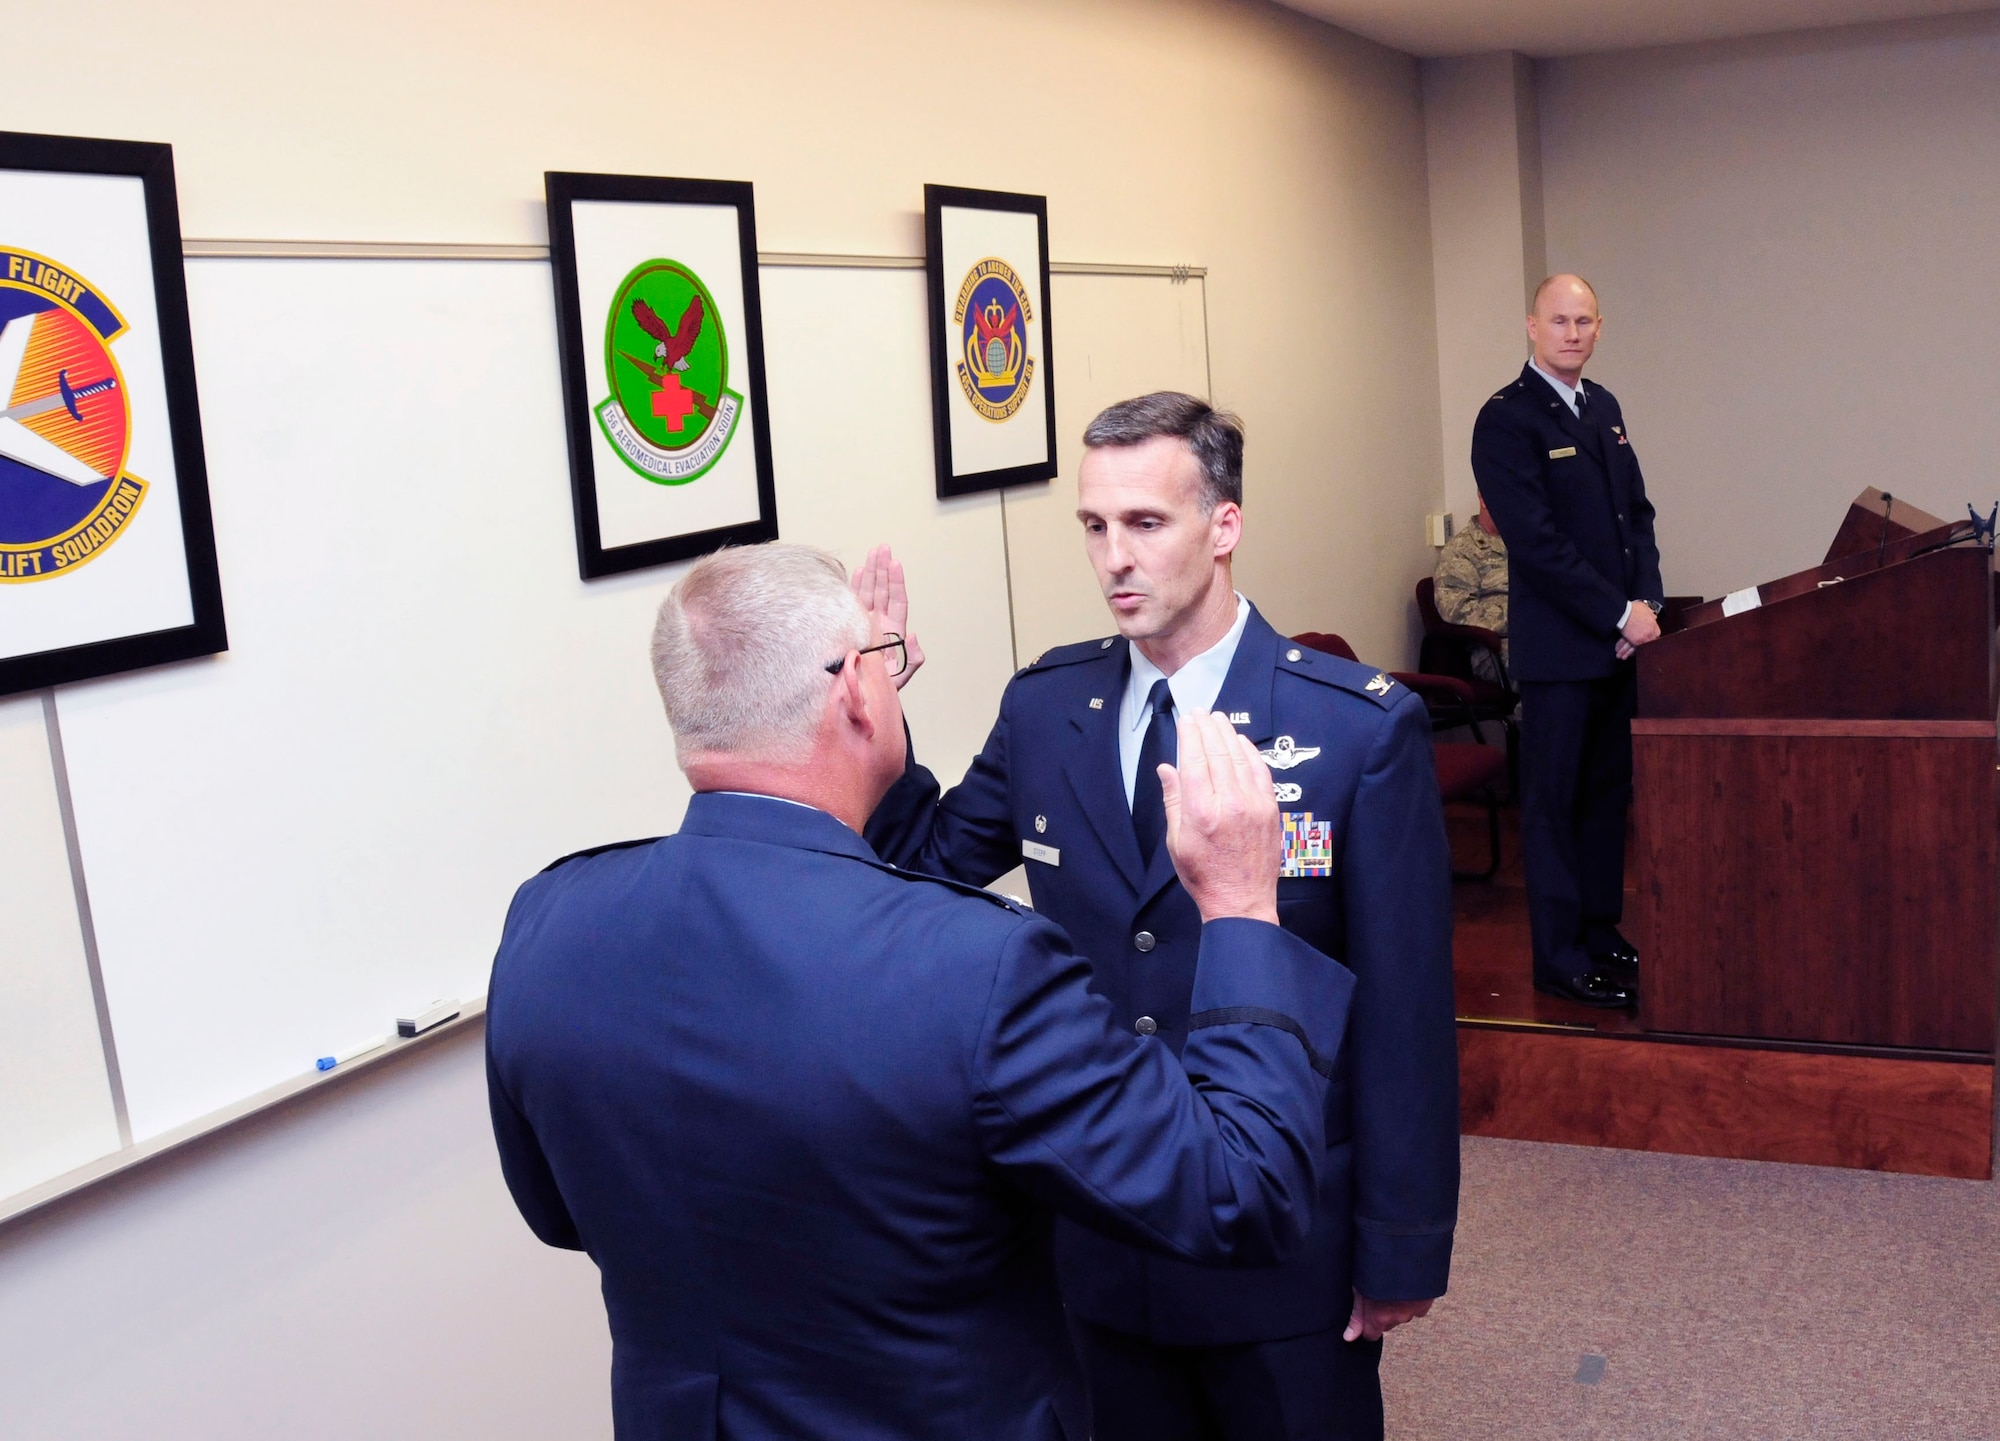 U.S. Air Force Col. Marshall C. Collins, commander, 145th Airlift Wing, officiates over a promotion ceremony held at the North Carolina Air National Guard Base, Charlotte Douglas International Airport, as Col. Joseph H. Stepp IV, recites the oath of office following his pinning to the rank of Colonel, June, 6, 2015. (U.S. Air National Guard photo by Master Sgt. Patricia F. Moran, 145th Public Affairs/Released)